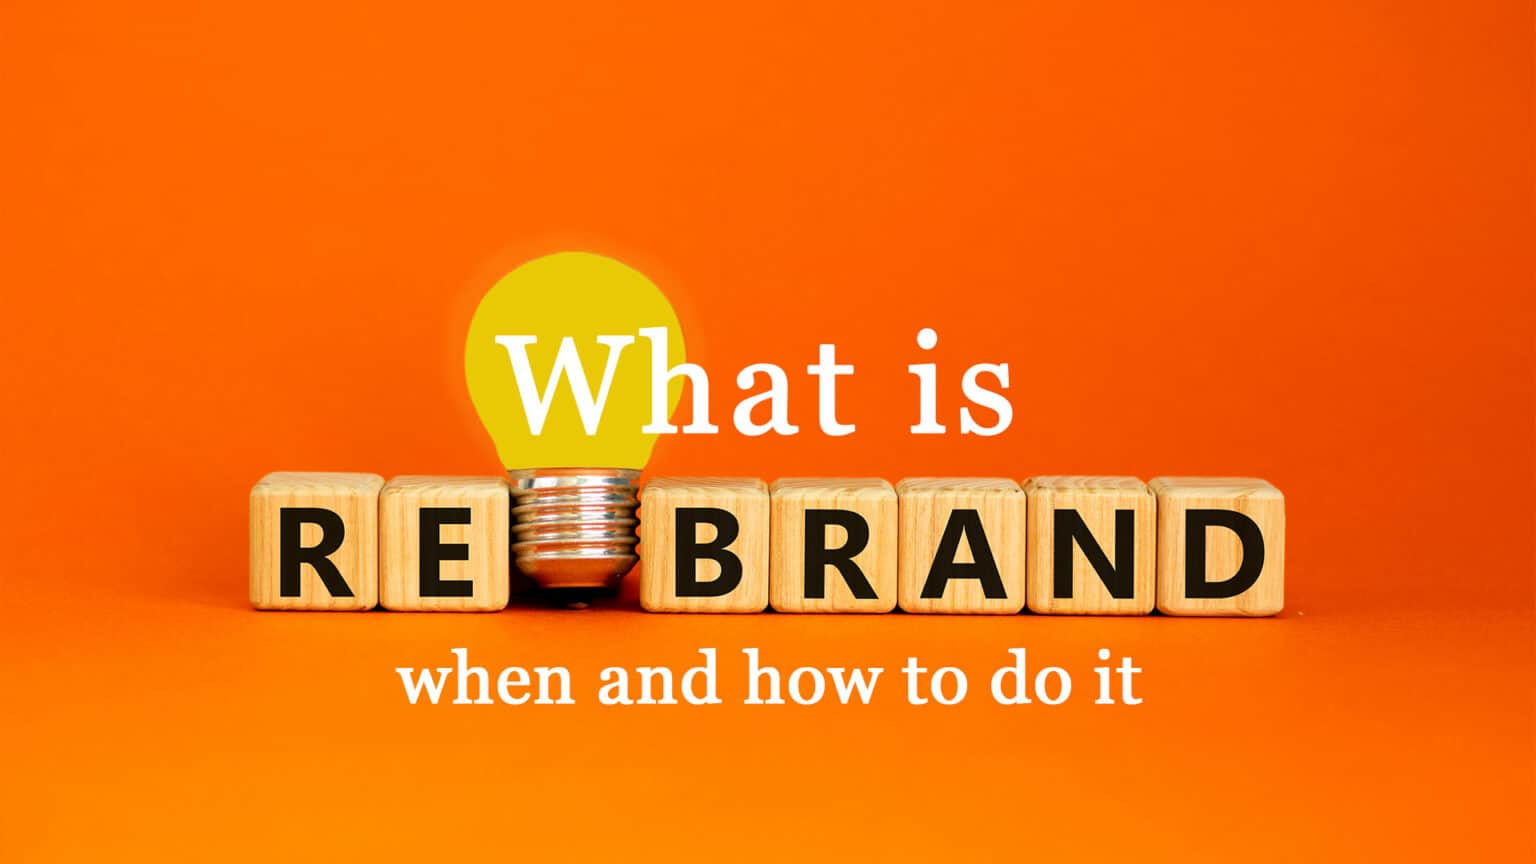 Text that says "Rebrand, what it is, when and how to do it" on an orange background